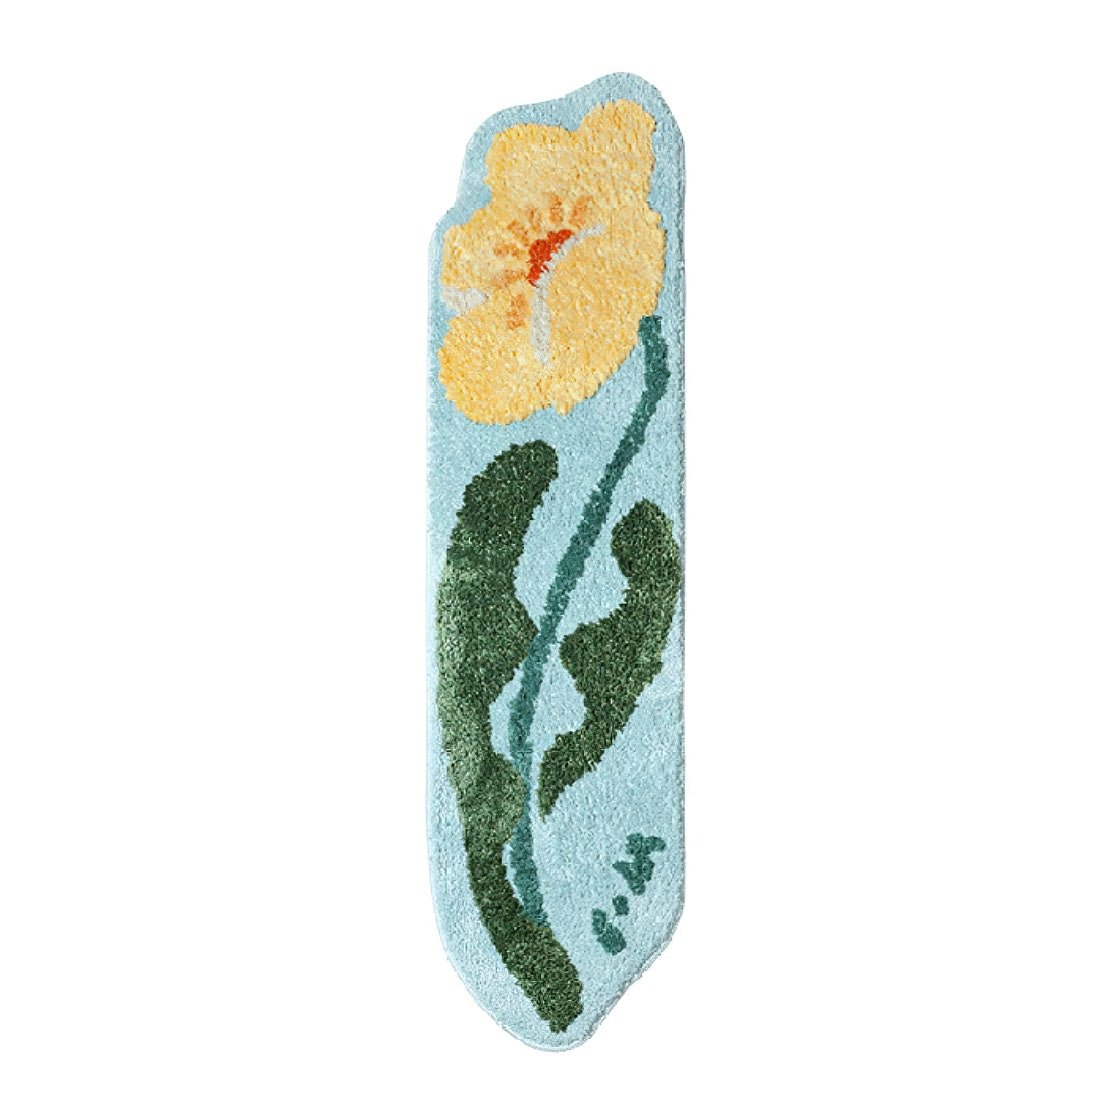 Blue, yellow and green flower floor rug.